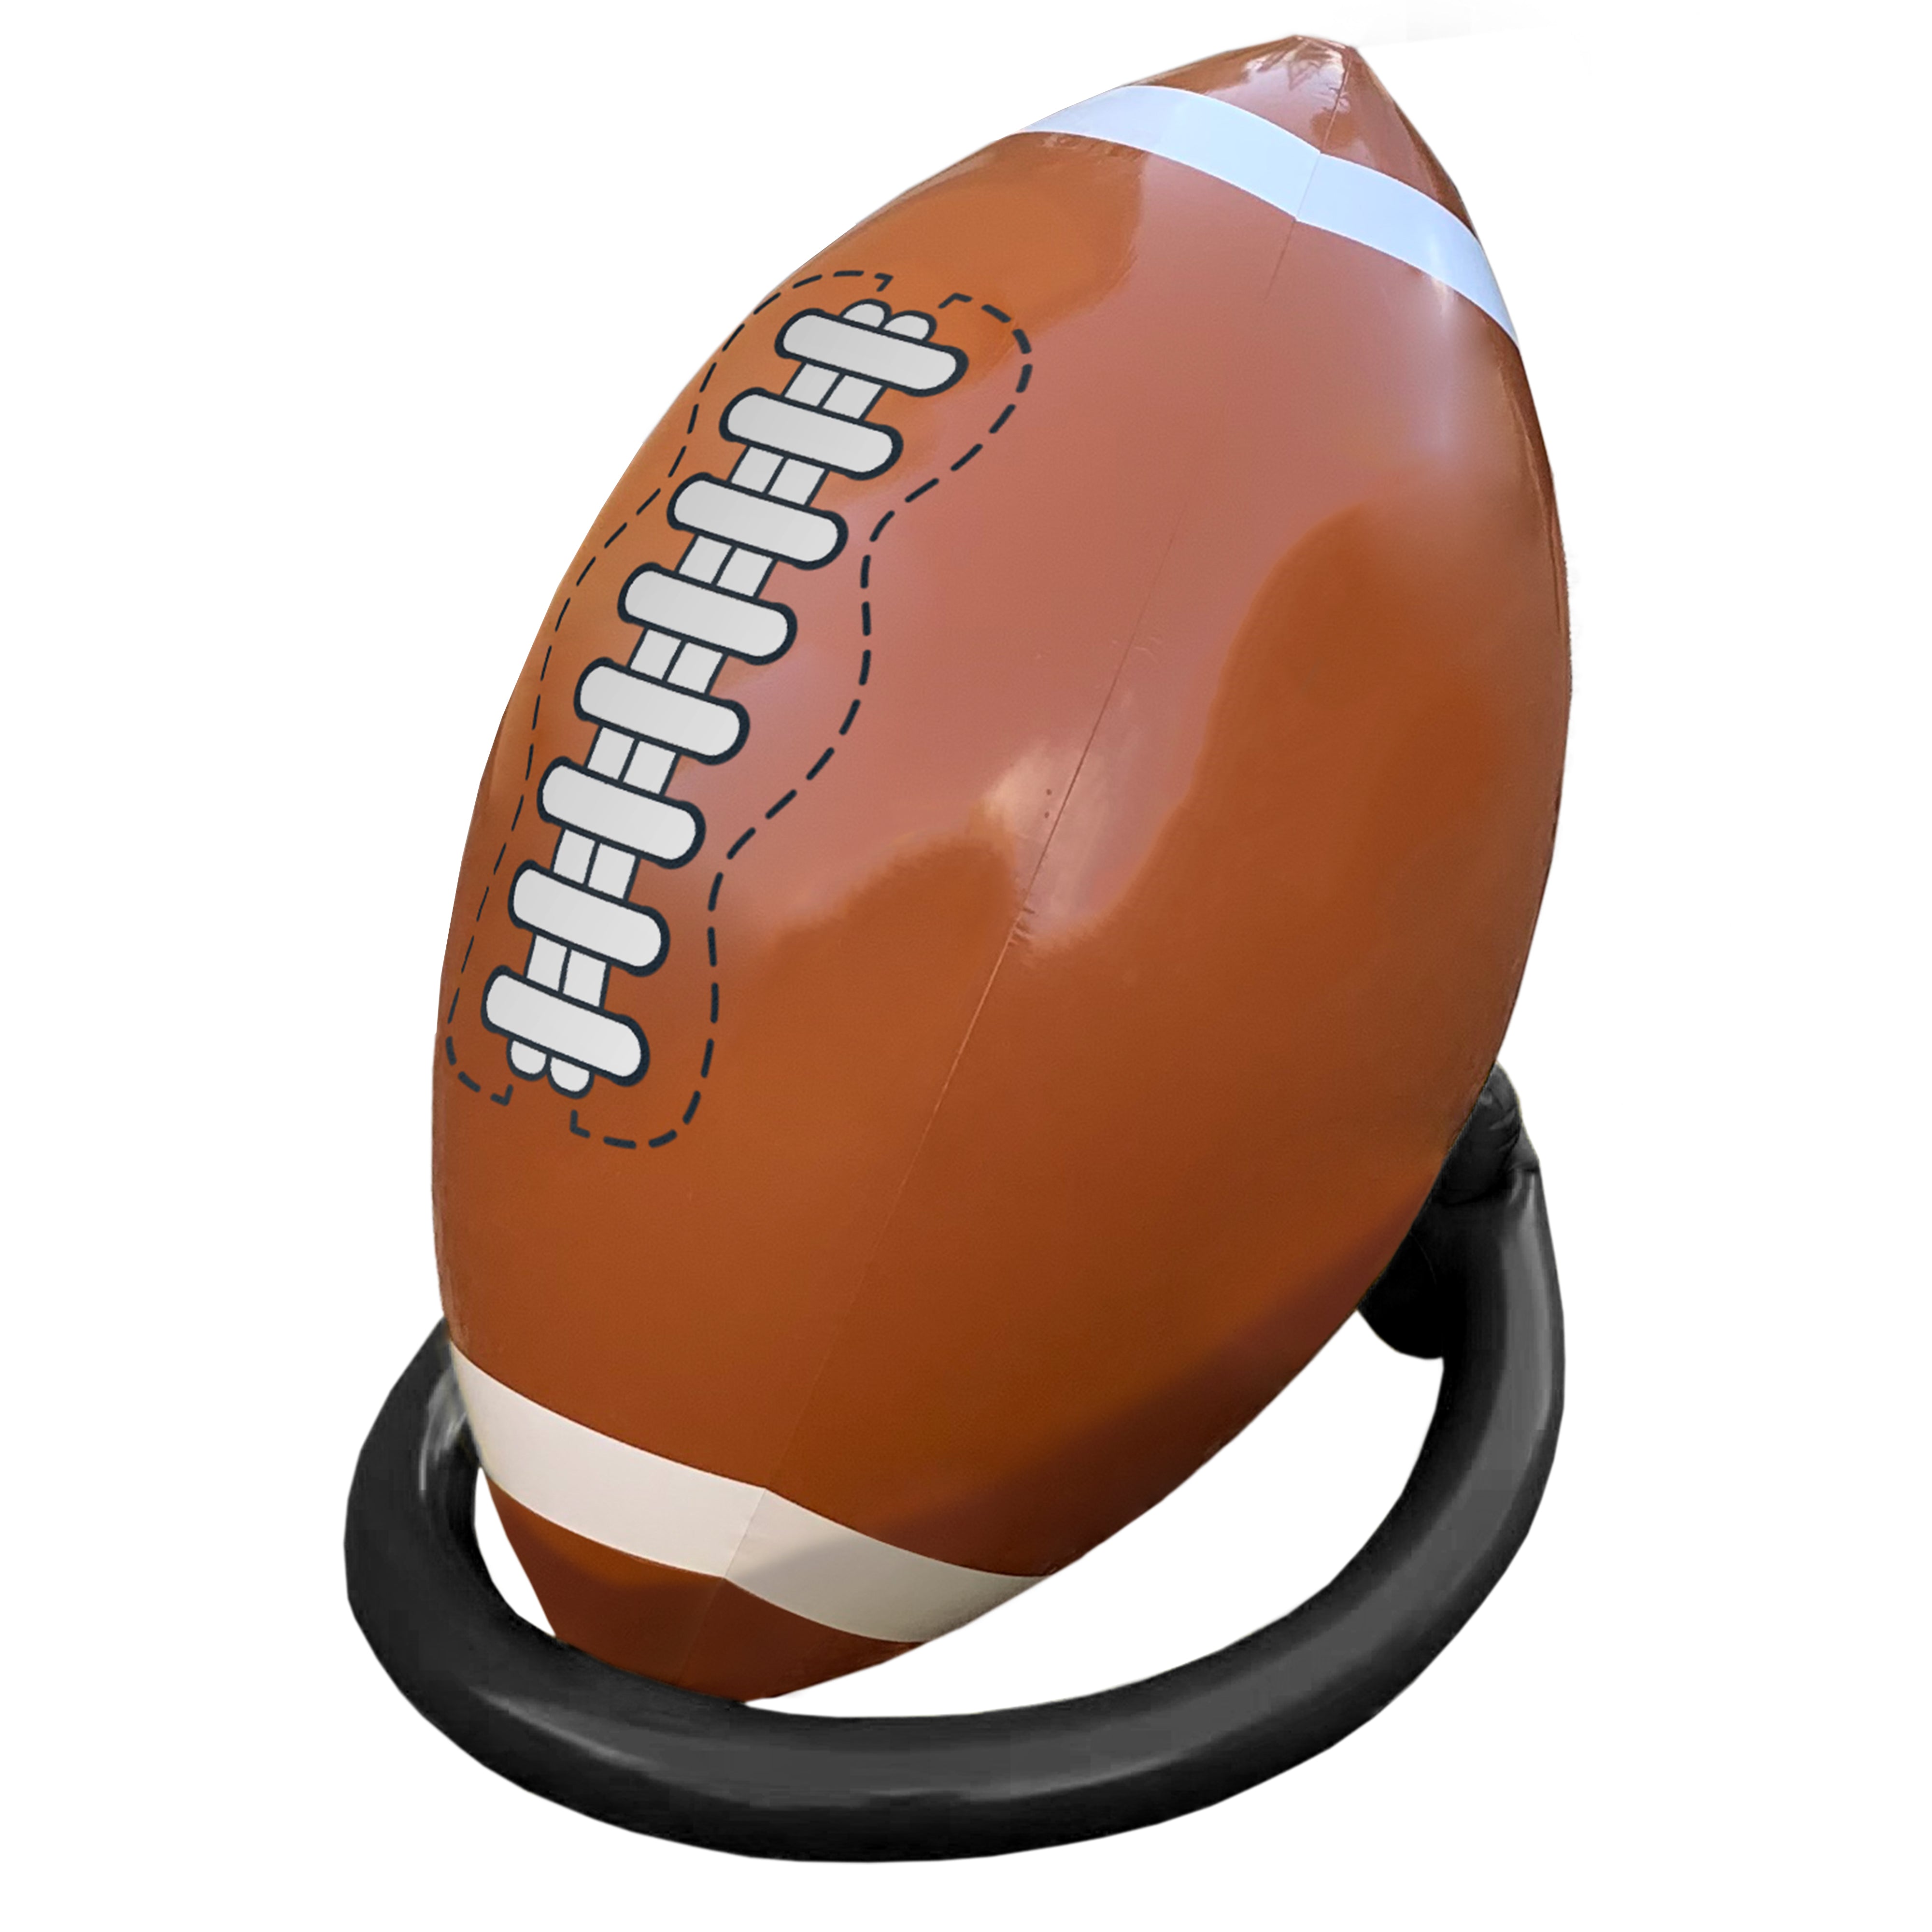 Giant Inflatable Football and Tee